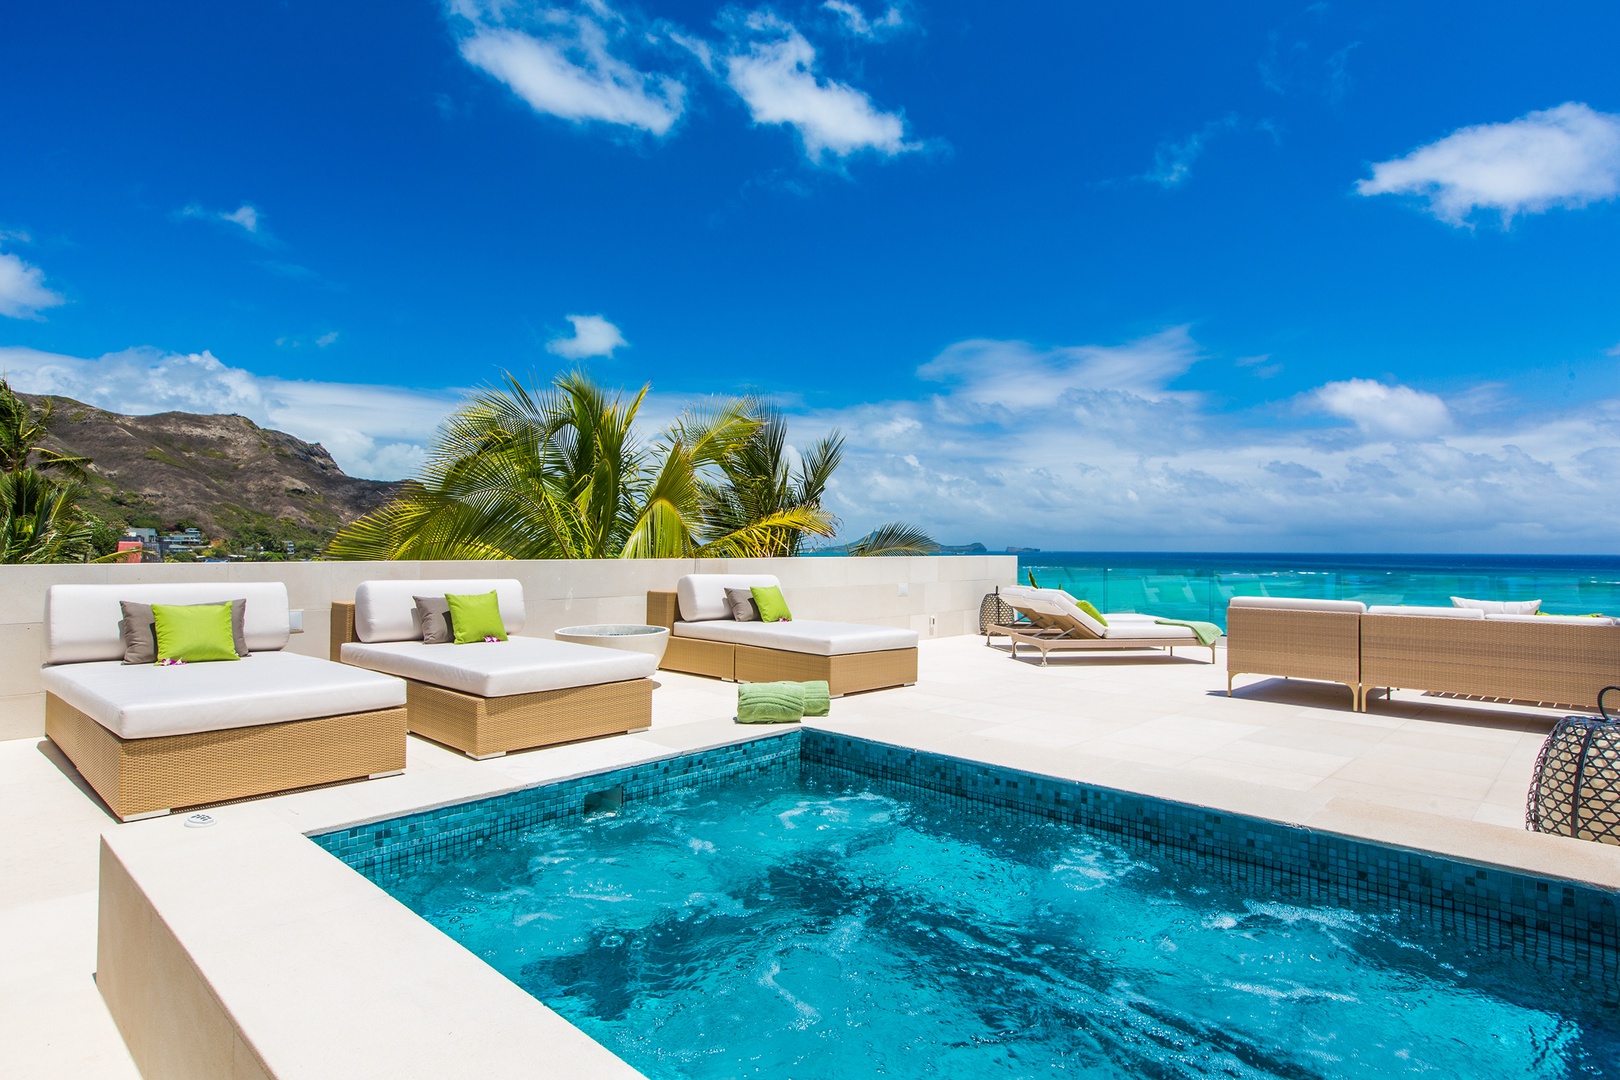 Kailua Vacation Rentals, Lanikai Hillside Estate - Jacuzzi and chaise loungers on 2nd floor deck